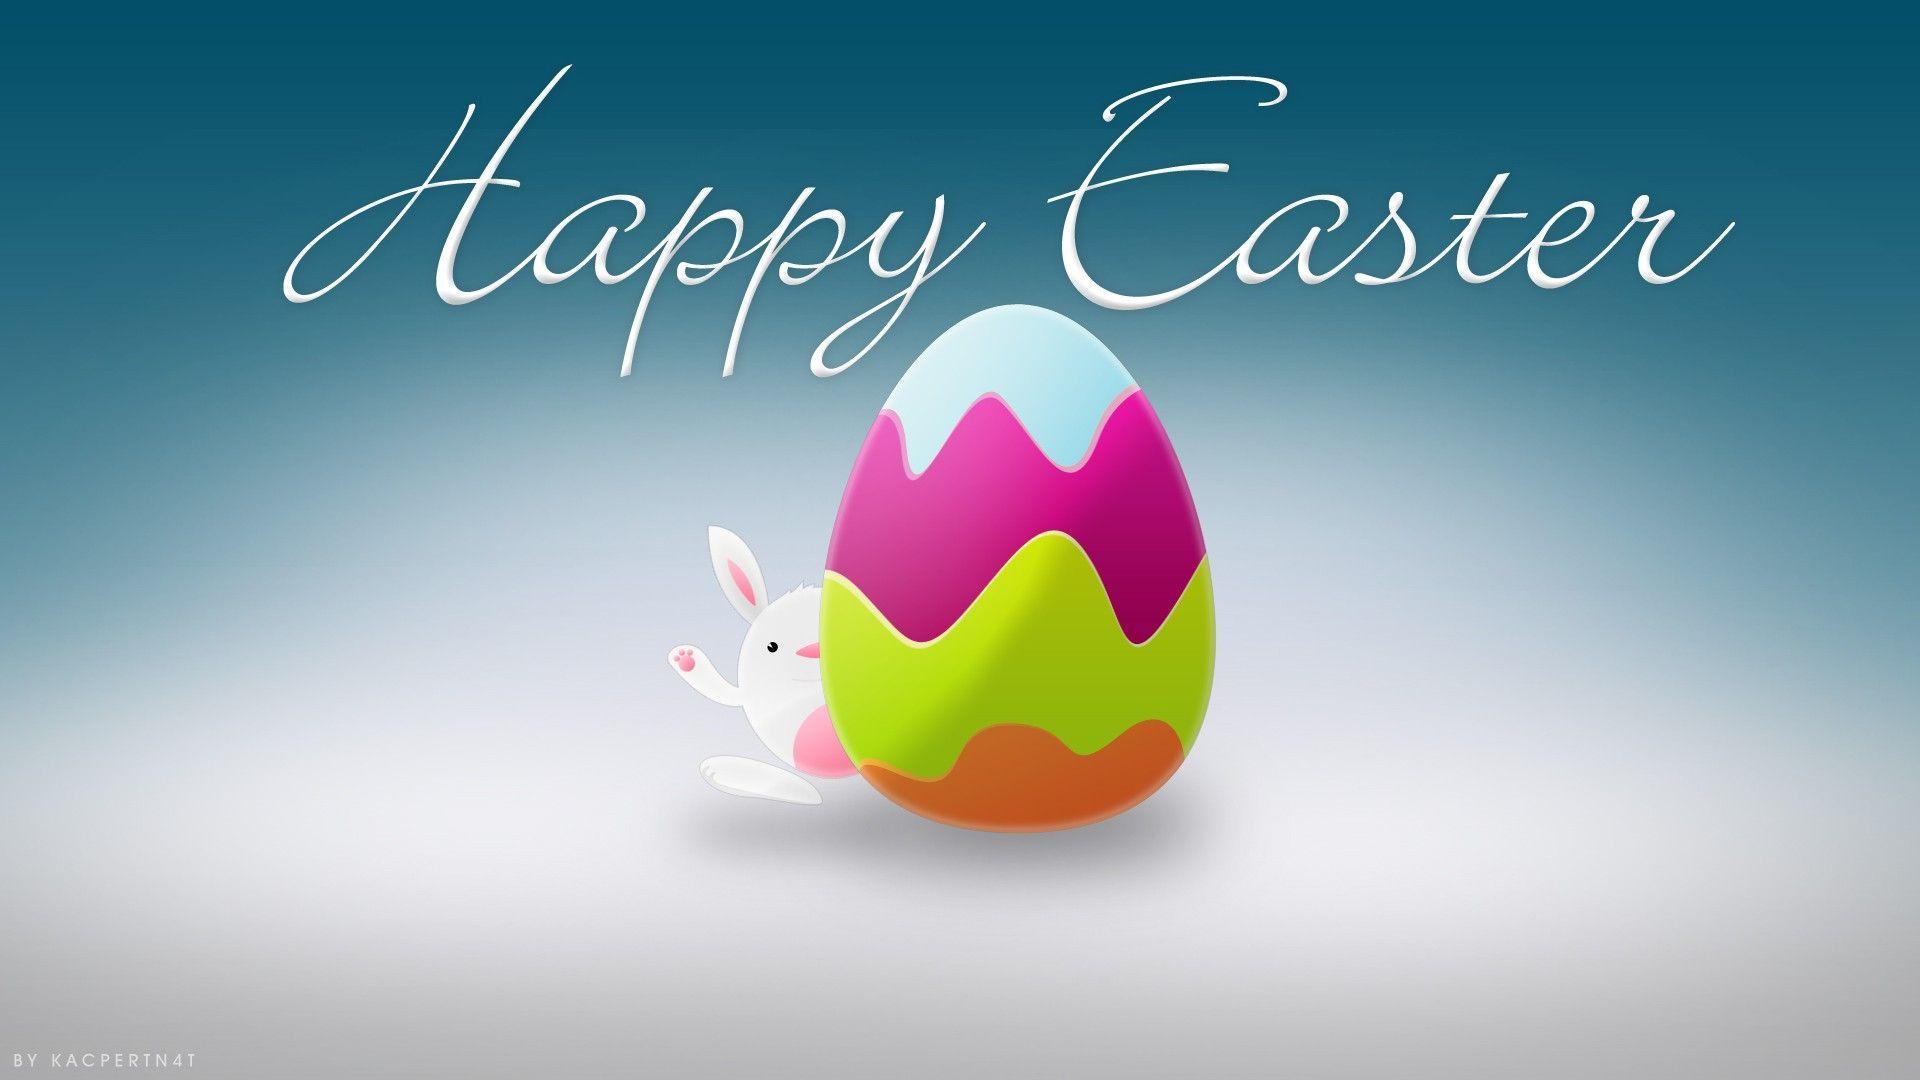 Happy Easter Day 2014 Wallpaper. High Definition Wallpaper